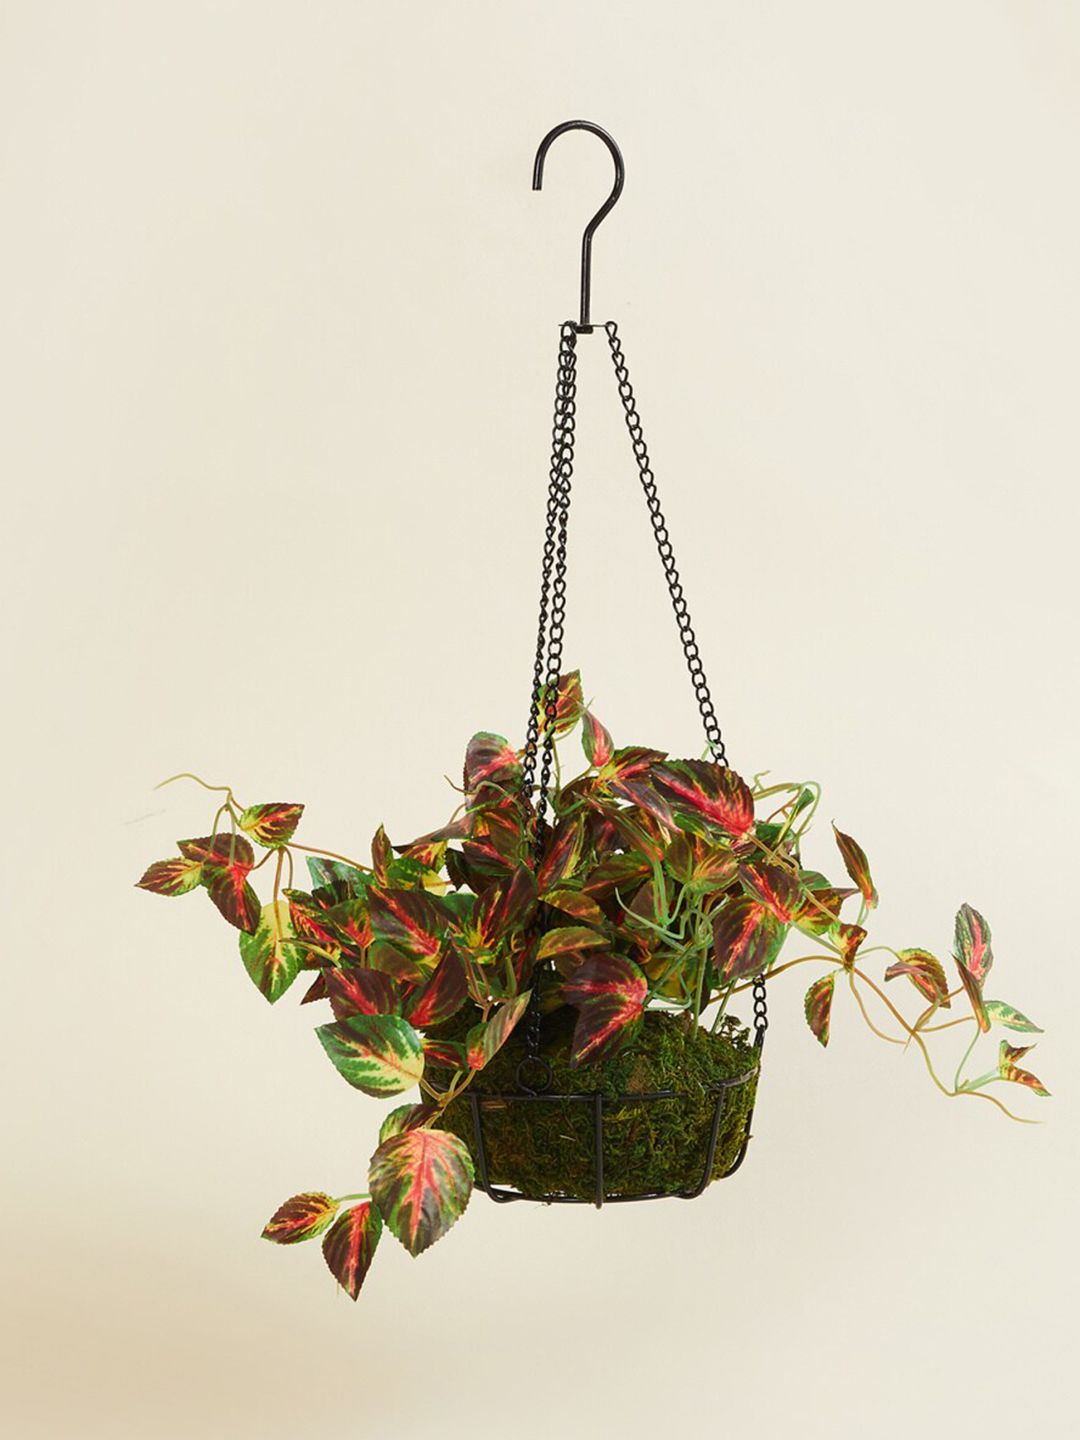 Home Centre Green Artificial Potted Plant Price in India